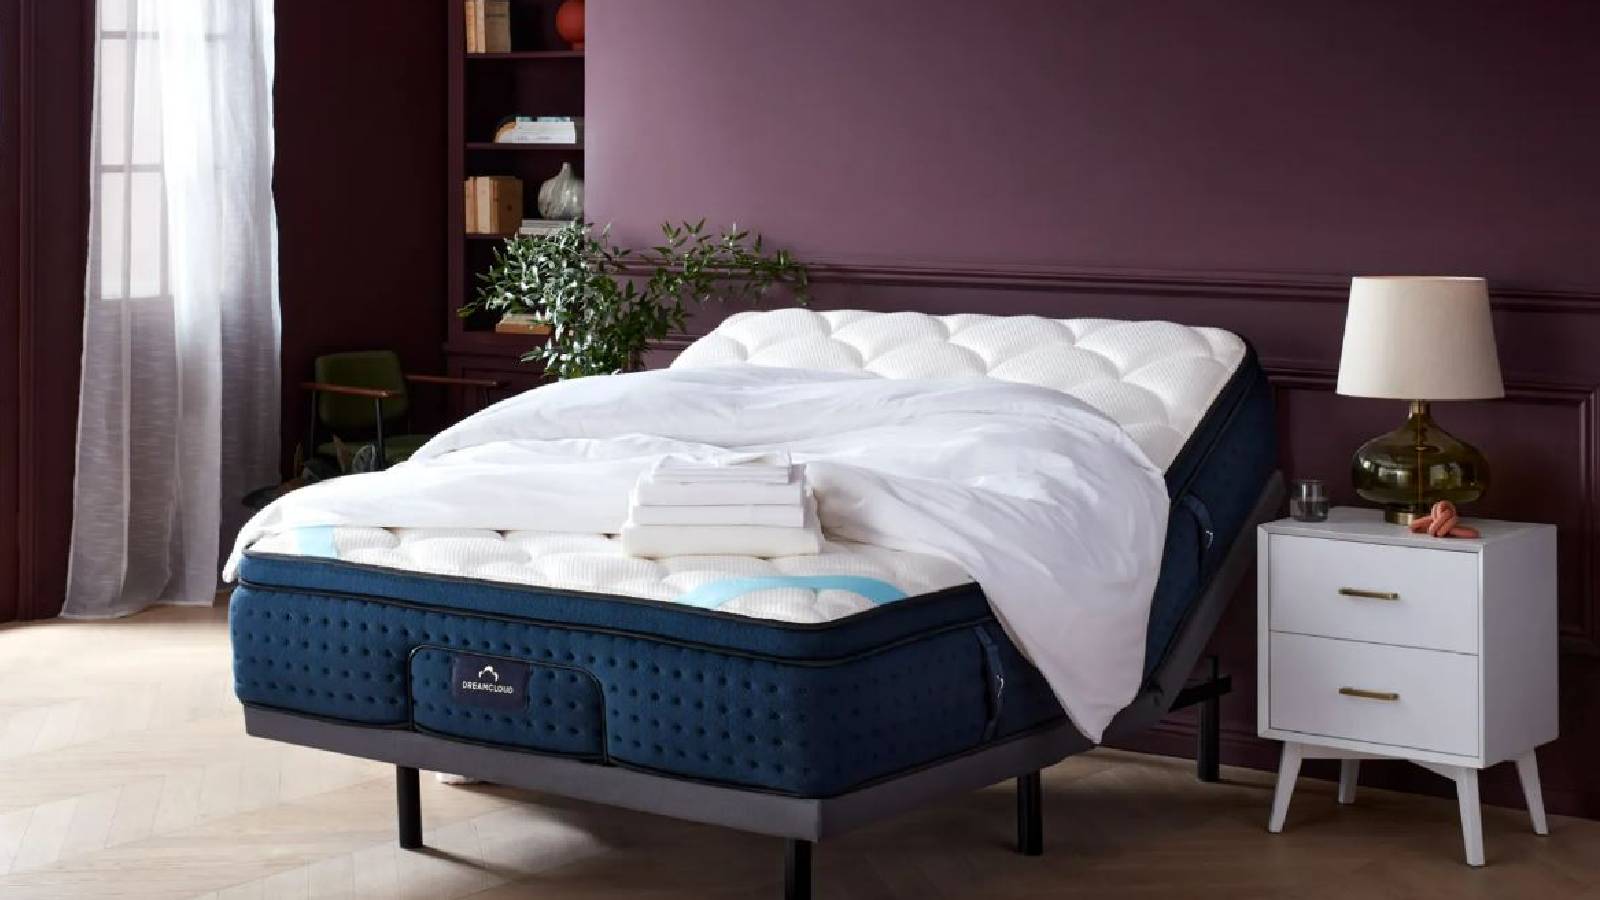 A DreamCloud mattress, bed frame and bed sheets